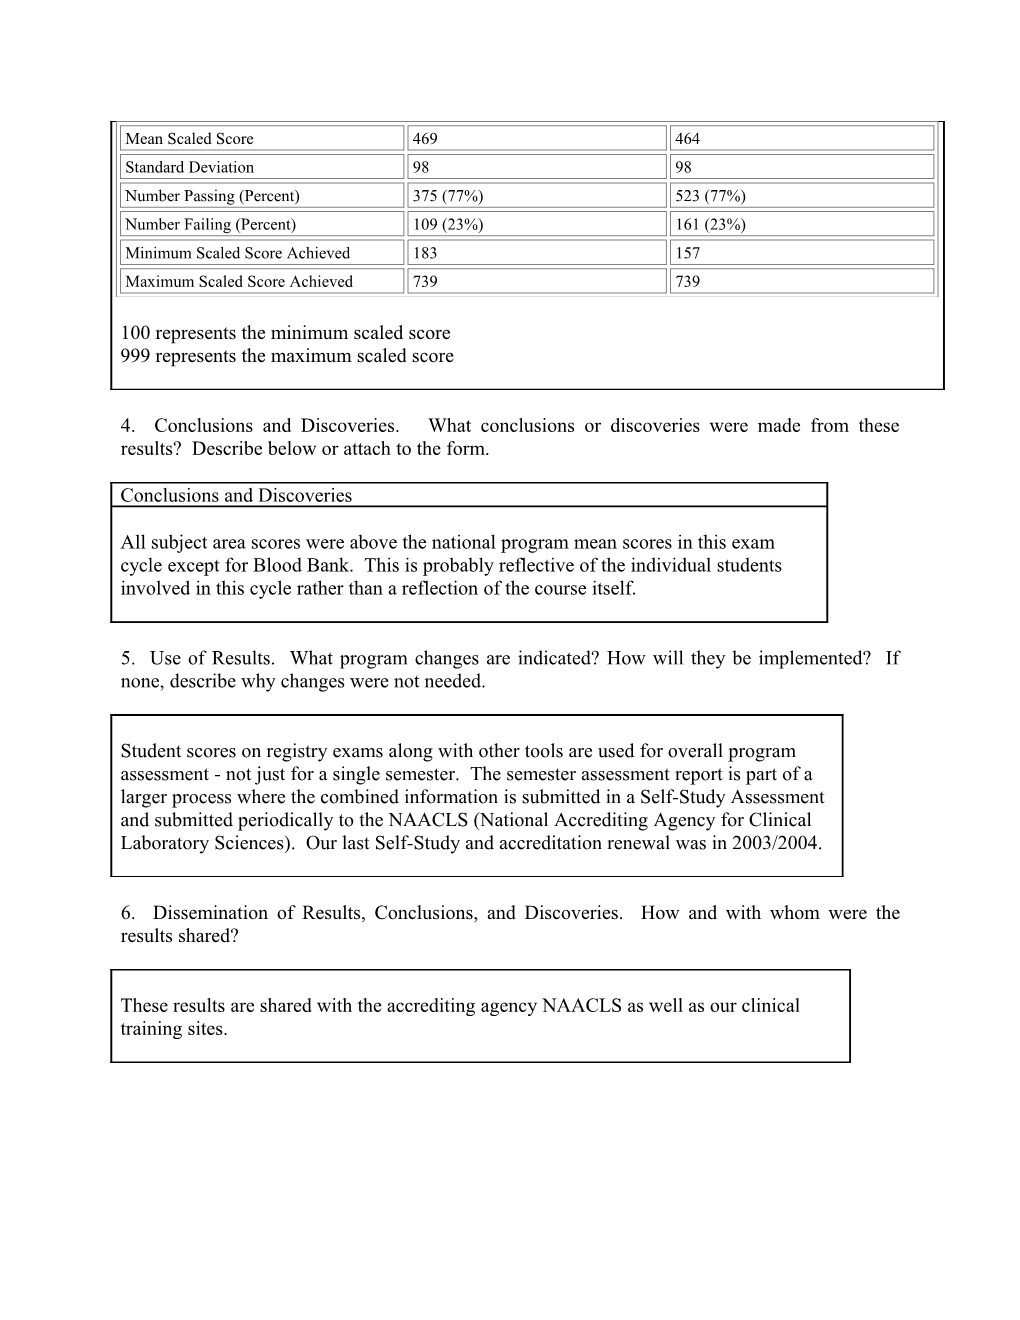 Annual Assessment Report Form for Student Learning Outcomes Assessment s5